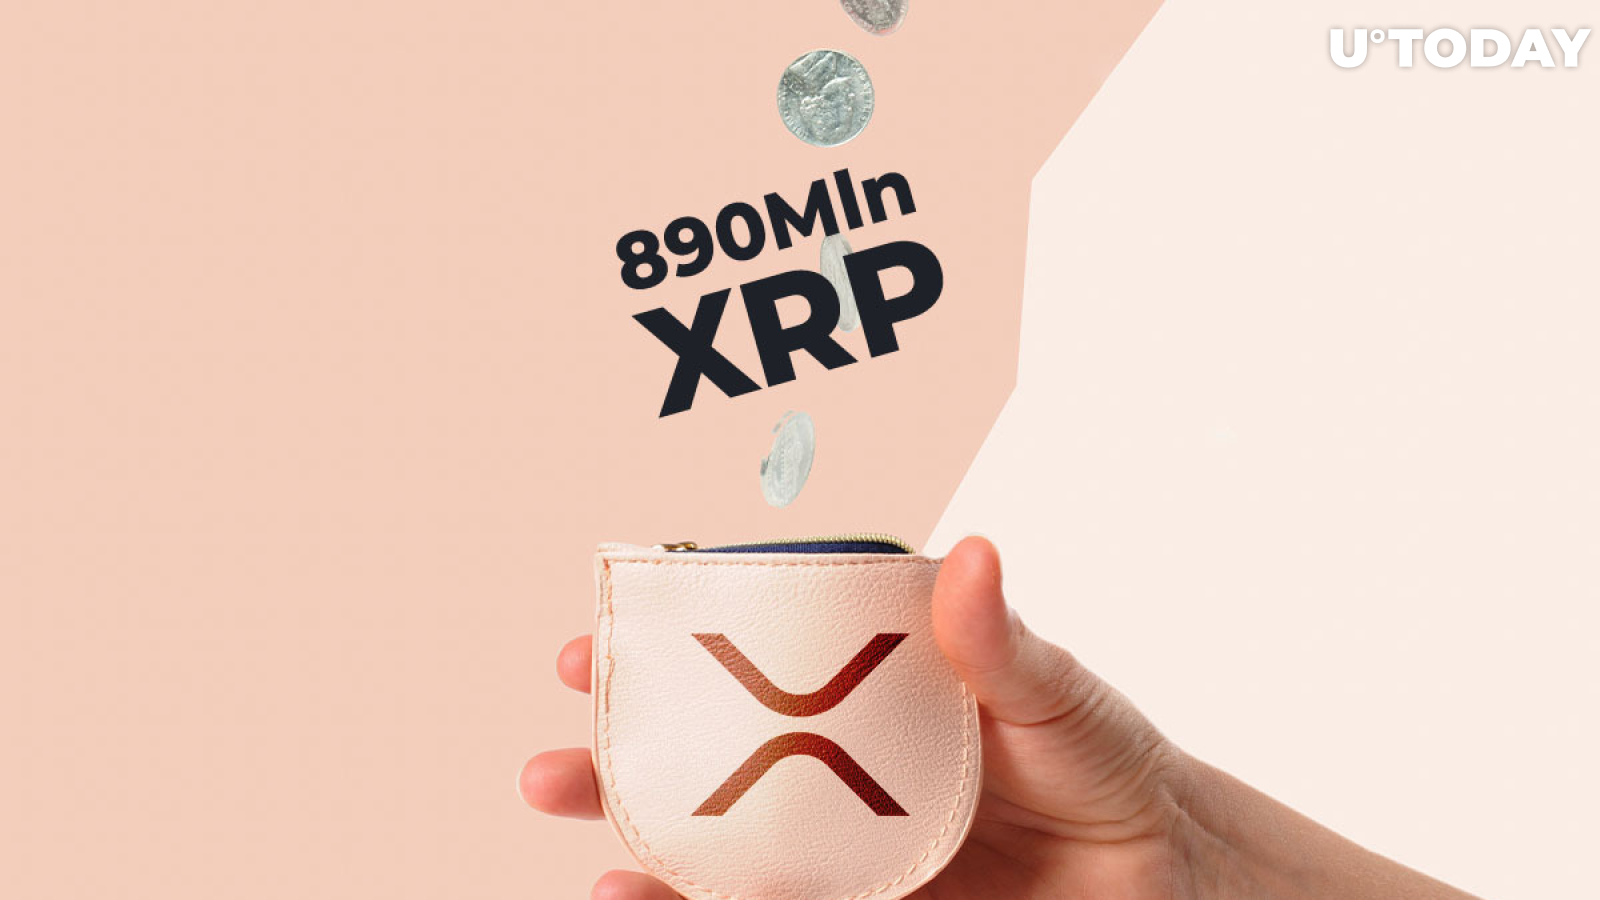 Almost 890 Mln XRP Moved by Ripple to Anonymous Wallet That May Be Another Escrow